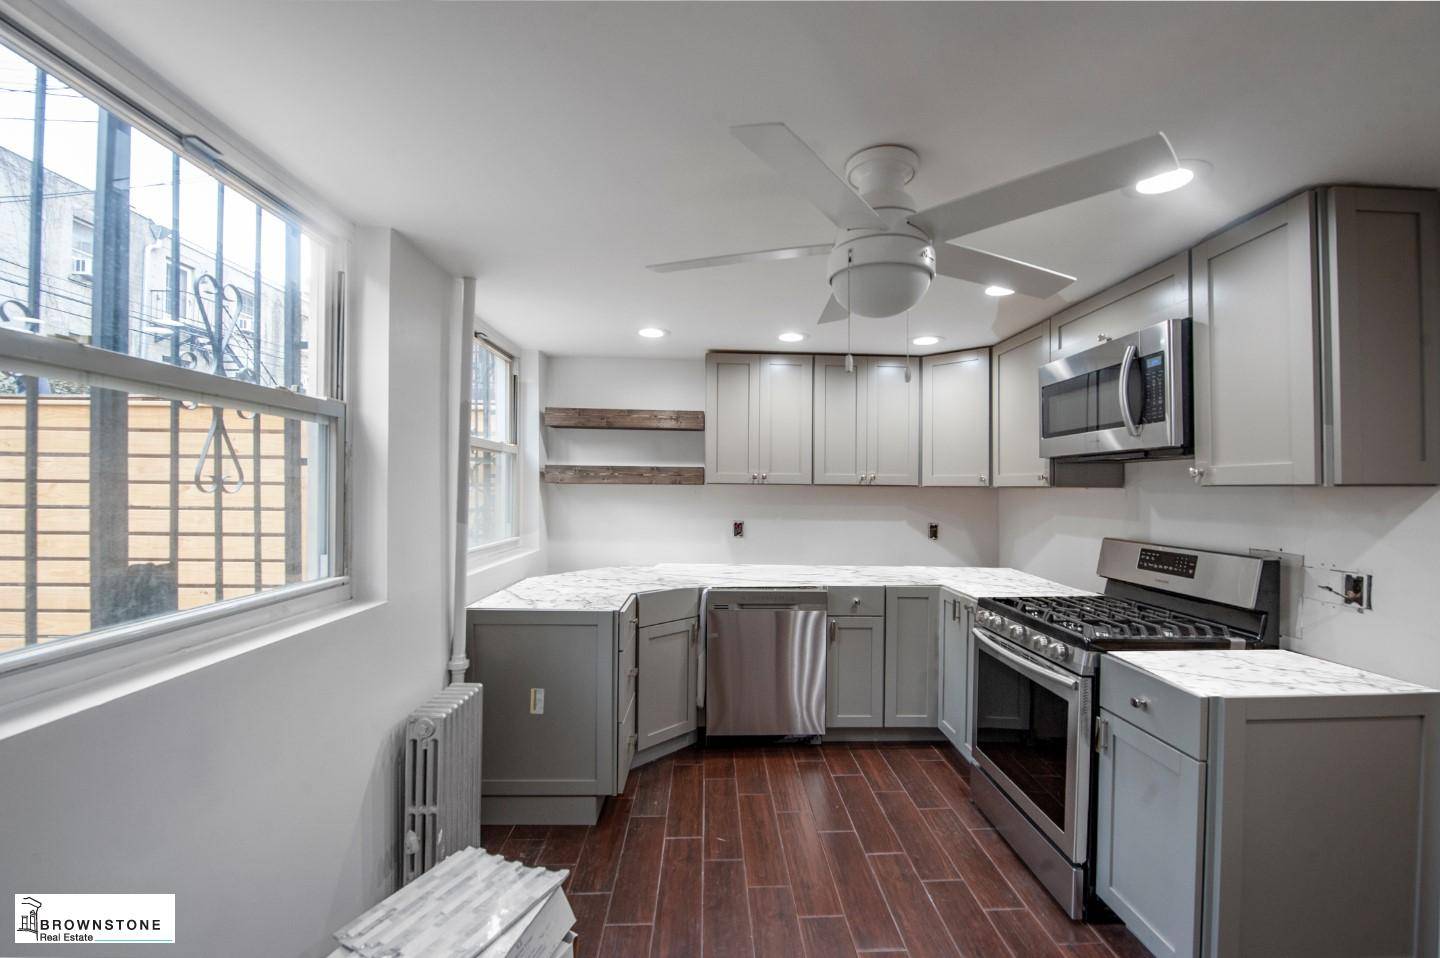 Renovated spacious one bedroom floor through with eat in kitchen with stainless steel appliances, dishwasher included, large living room, hardwood floors, and huge private backyard.